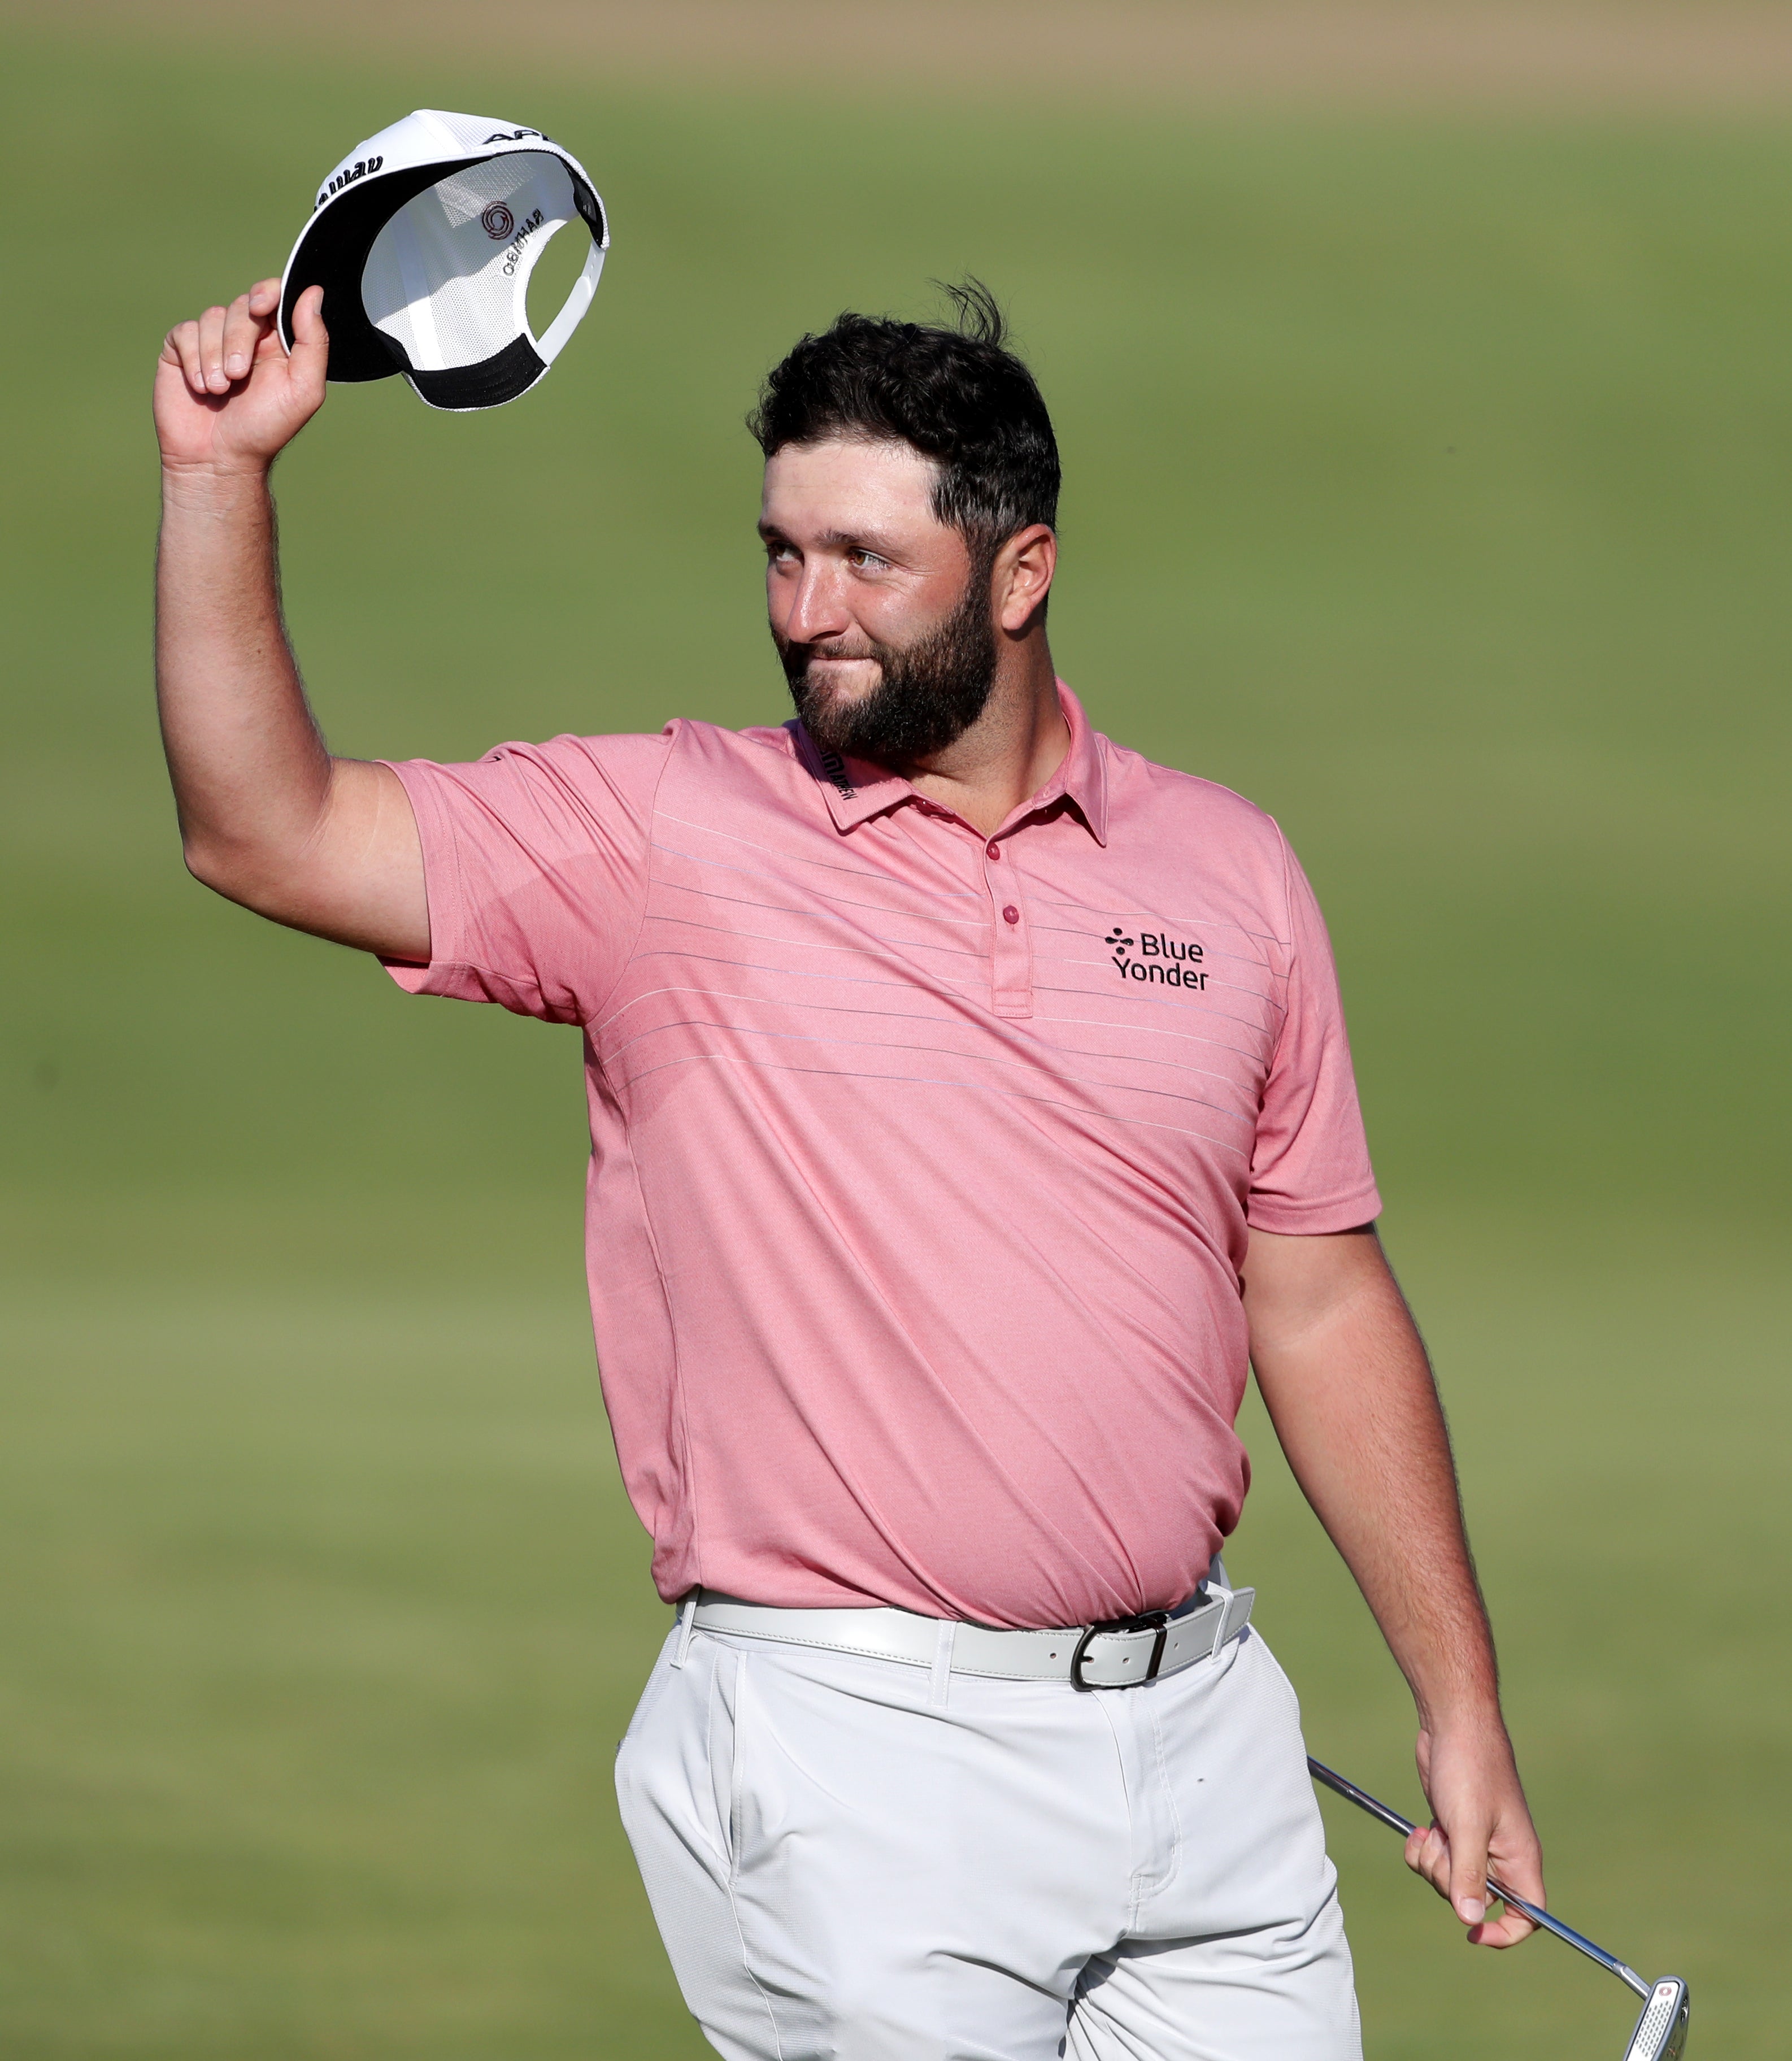 Jon Rahm finished in a tie for third at The Open last week